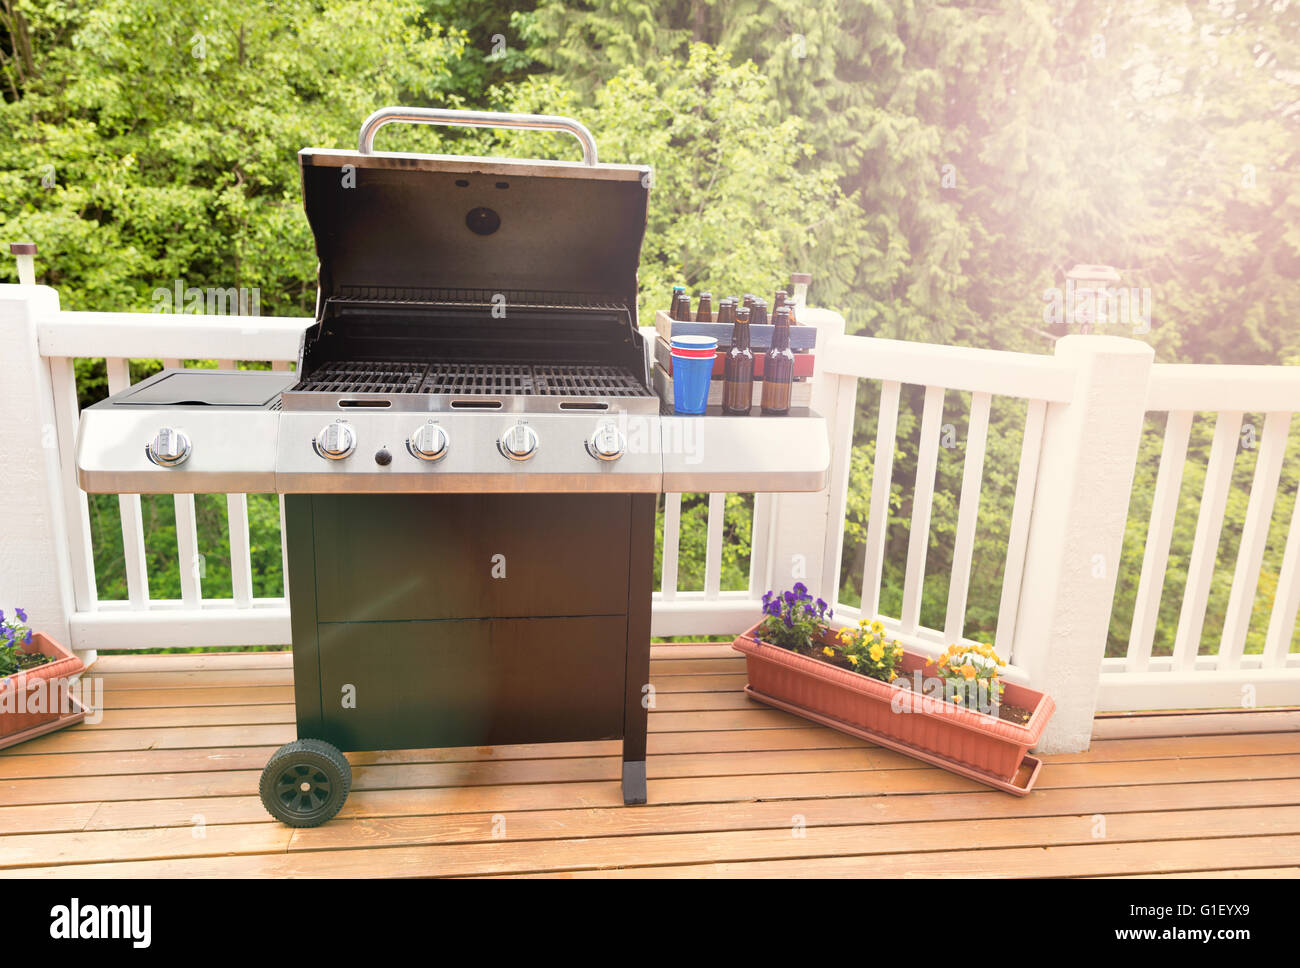 Bright daylight falling on open large barbecue cooker, bottled beer, cup, and crate on cedar wood deck with trees in background. Stock Photo